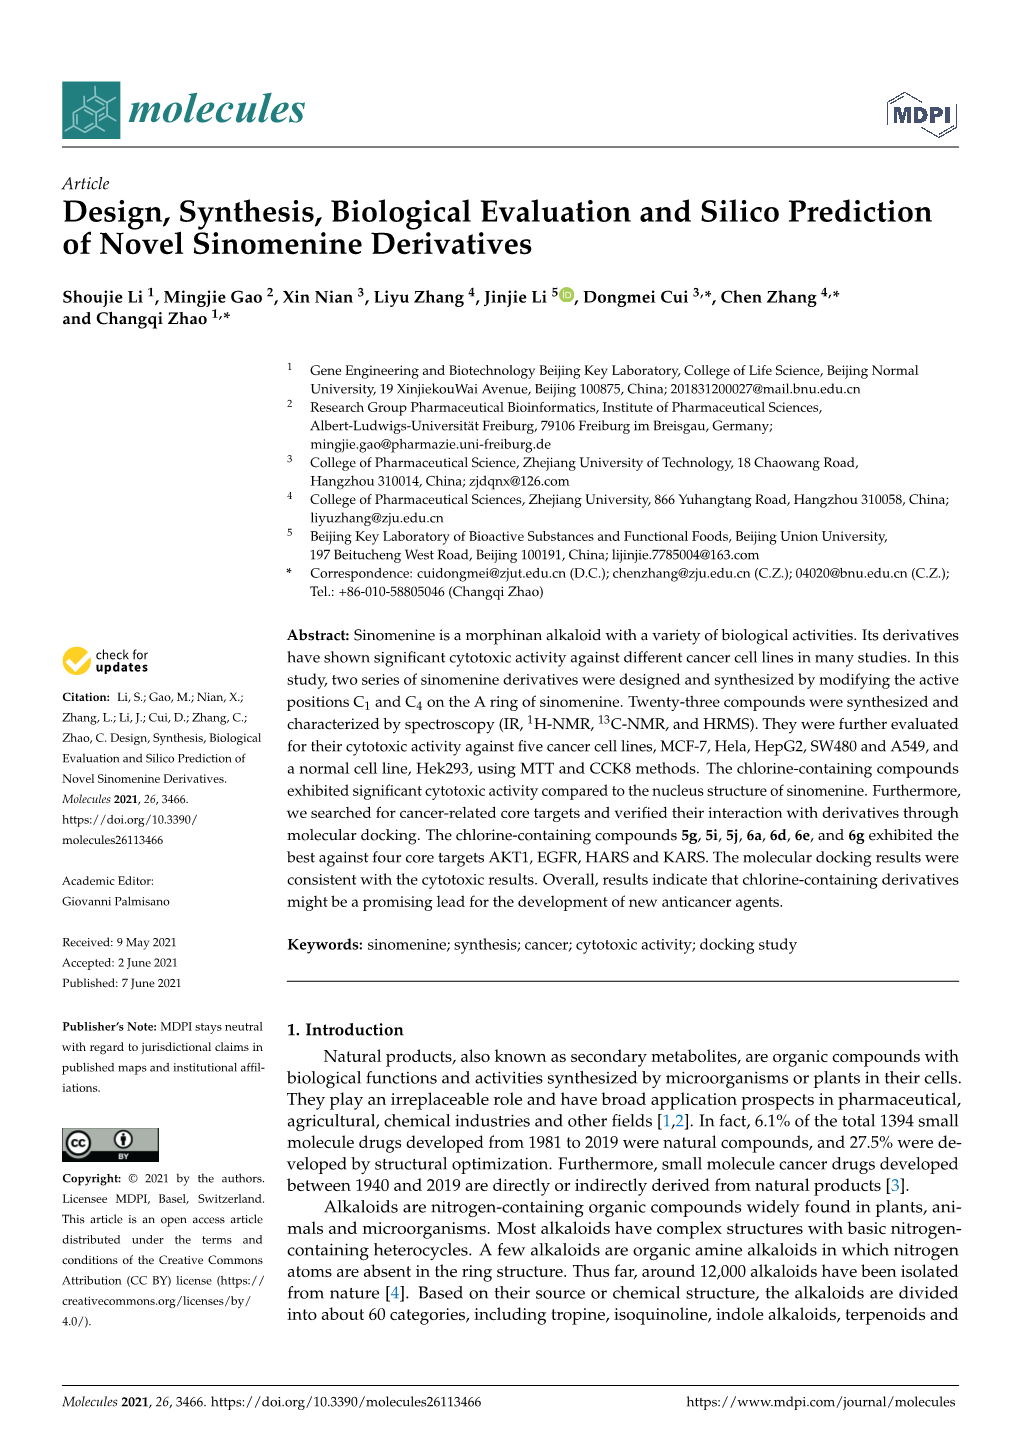 Design, Synthesis, Biological Evaluation and Silico Prediction of Novel Sinomenine Derivatives